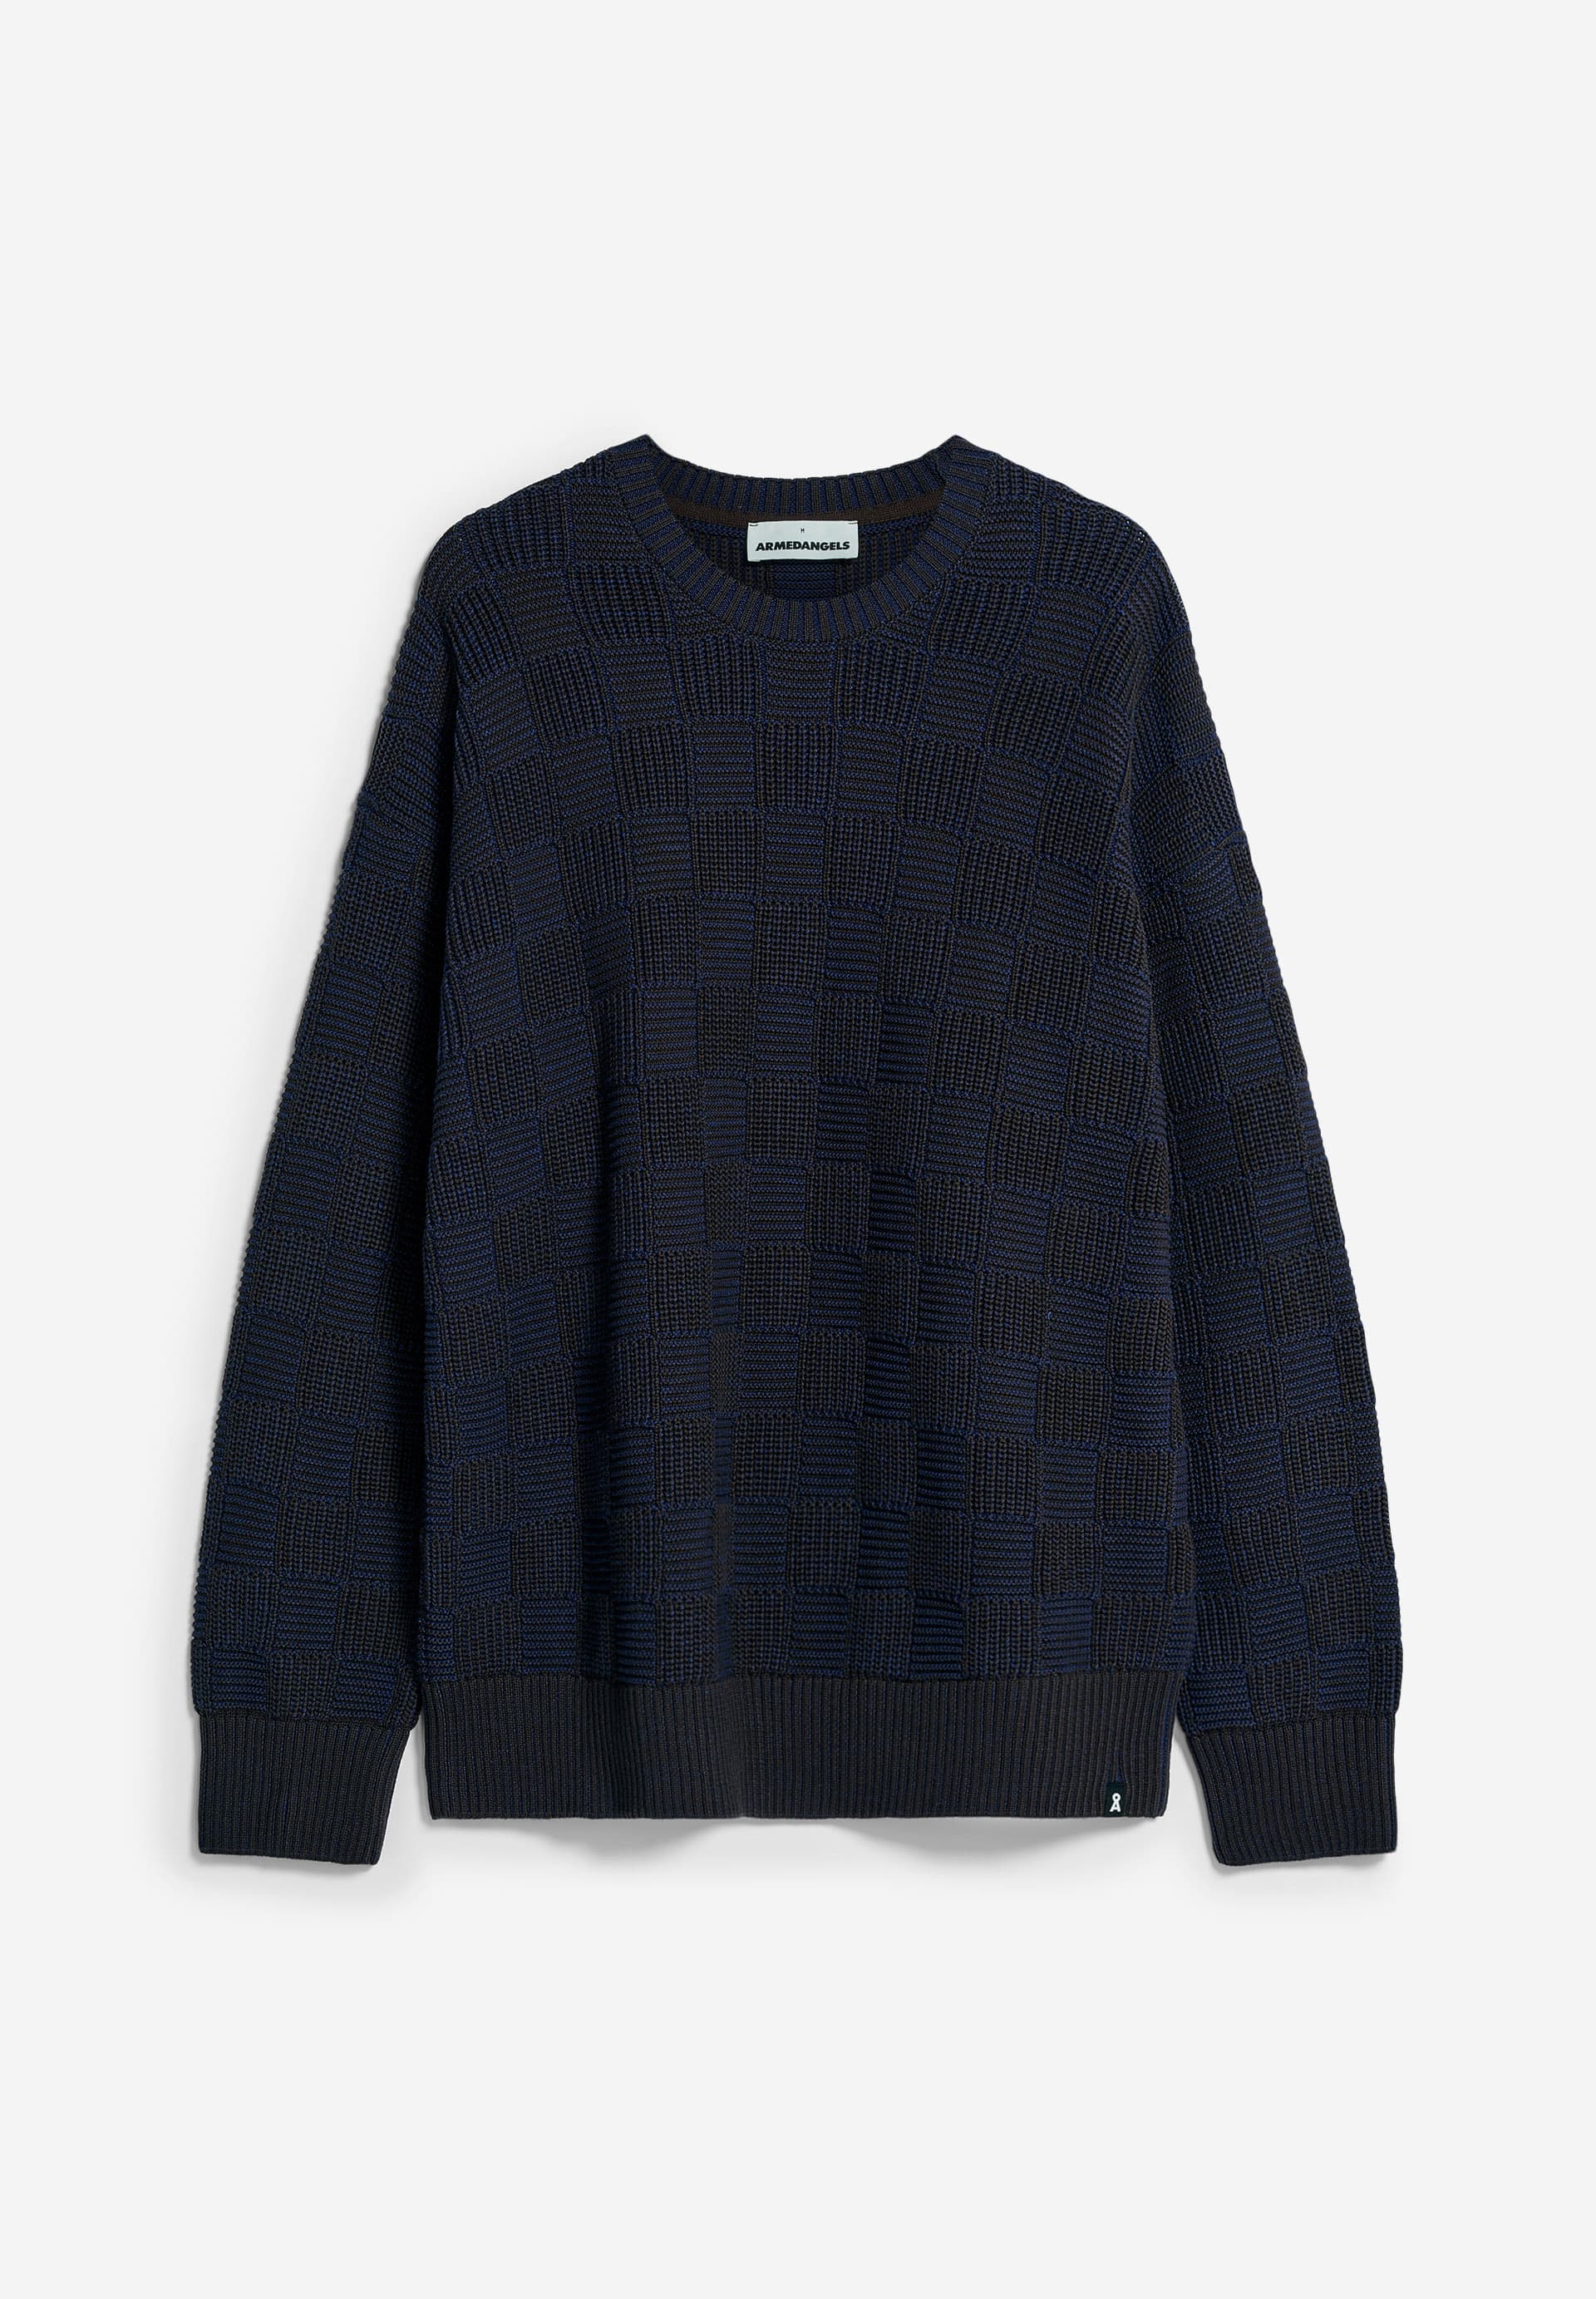 WYAAT Sweater Relaxed Fit made of Organic Cotton